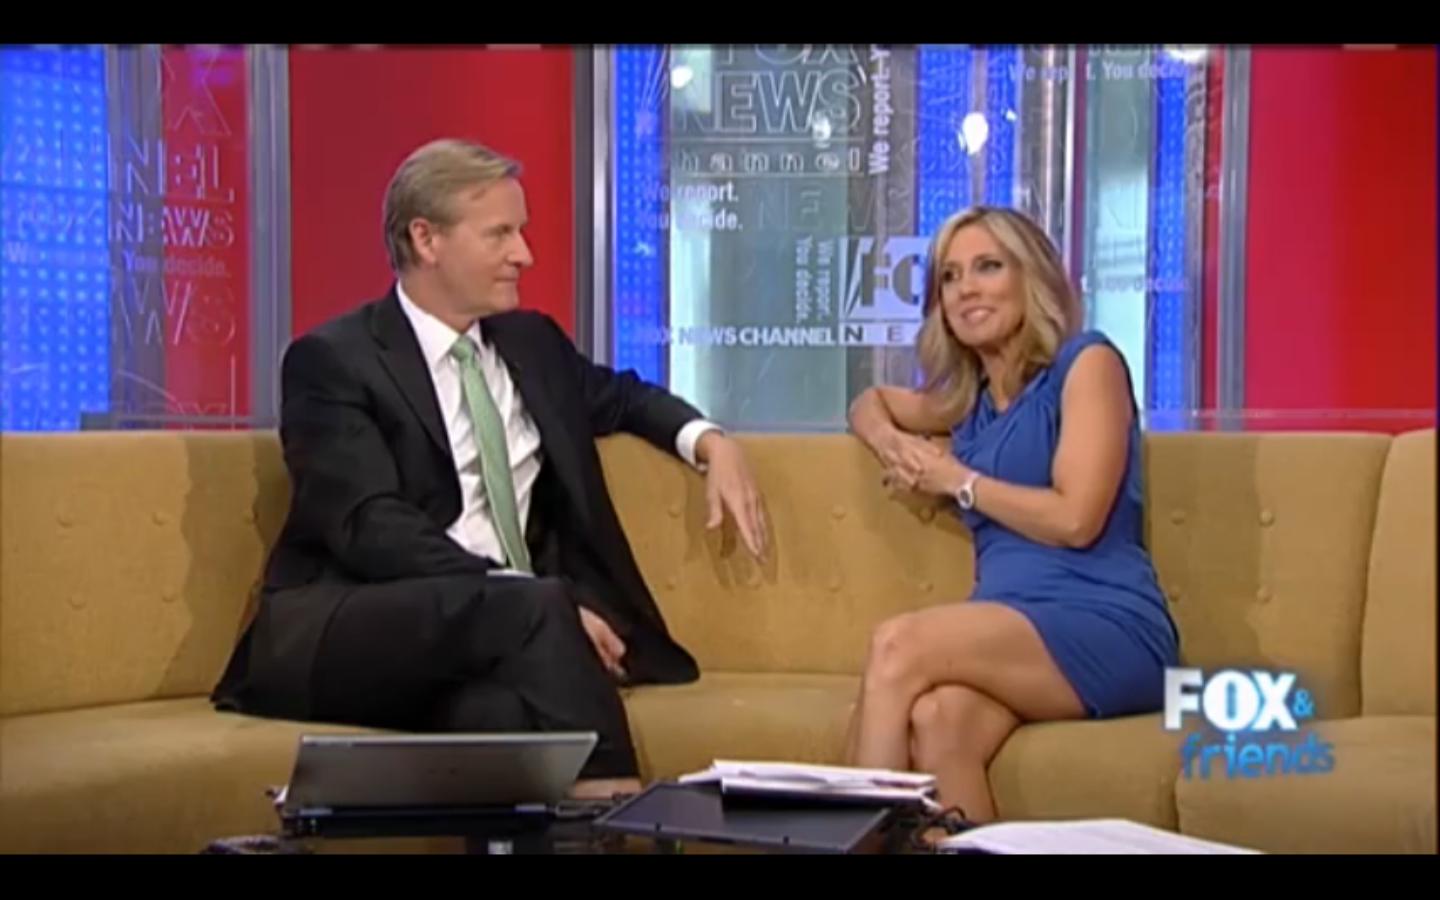 More Alisyn Camerota legs on the Fox & Friends couch - Sexy Leg Cross1440 x 900